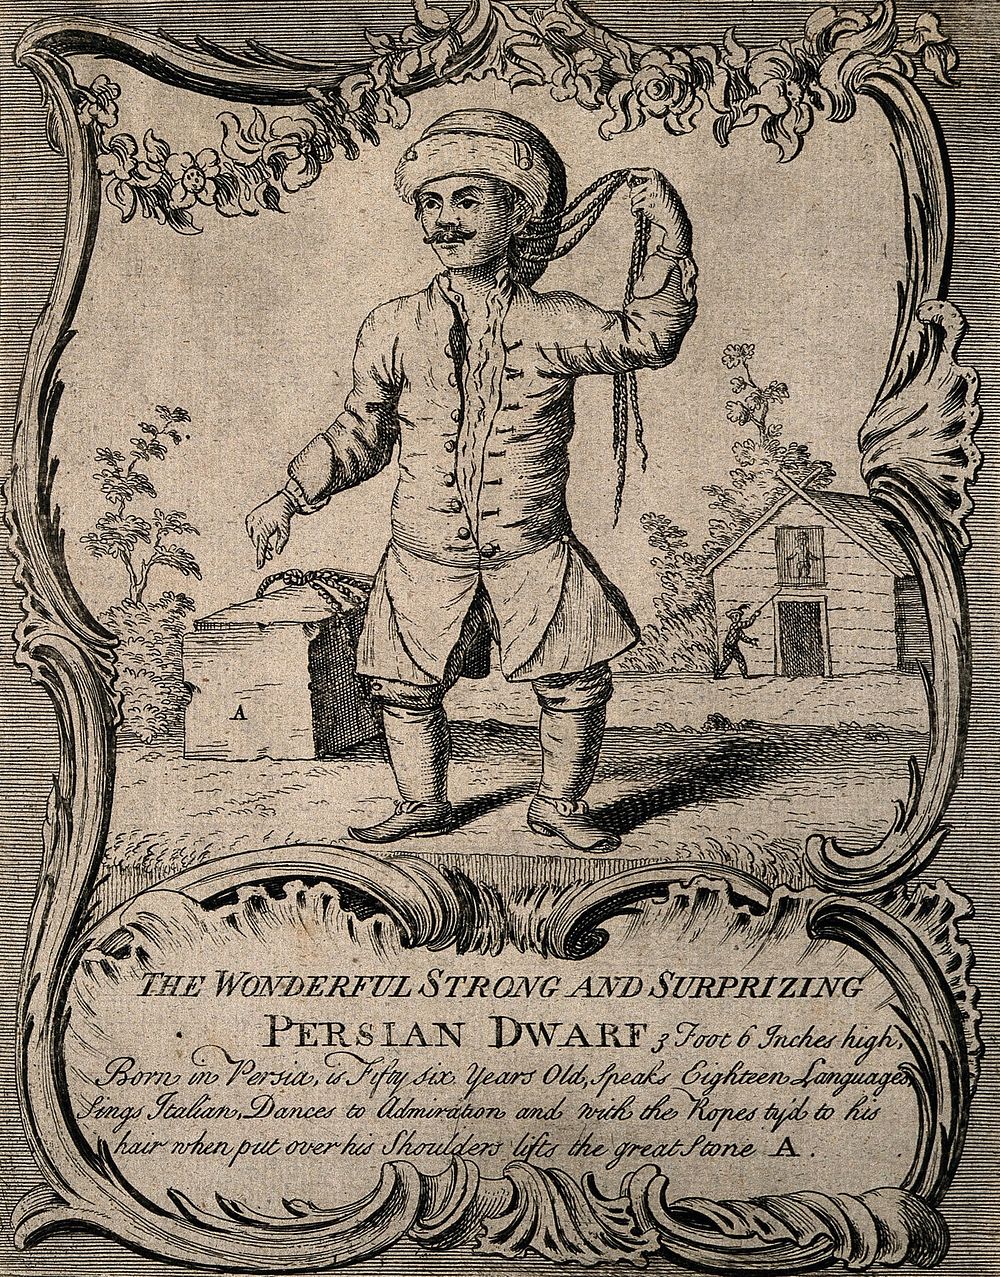 A male dwarf said to be Persian and to possess unusual talents. Etching, ca. 1740.